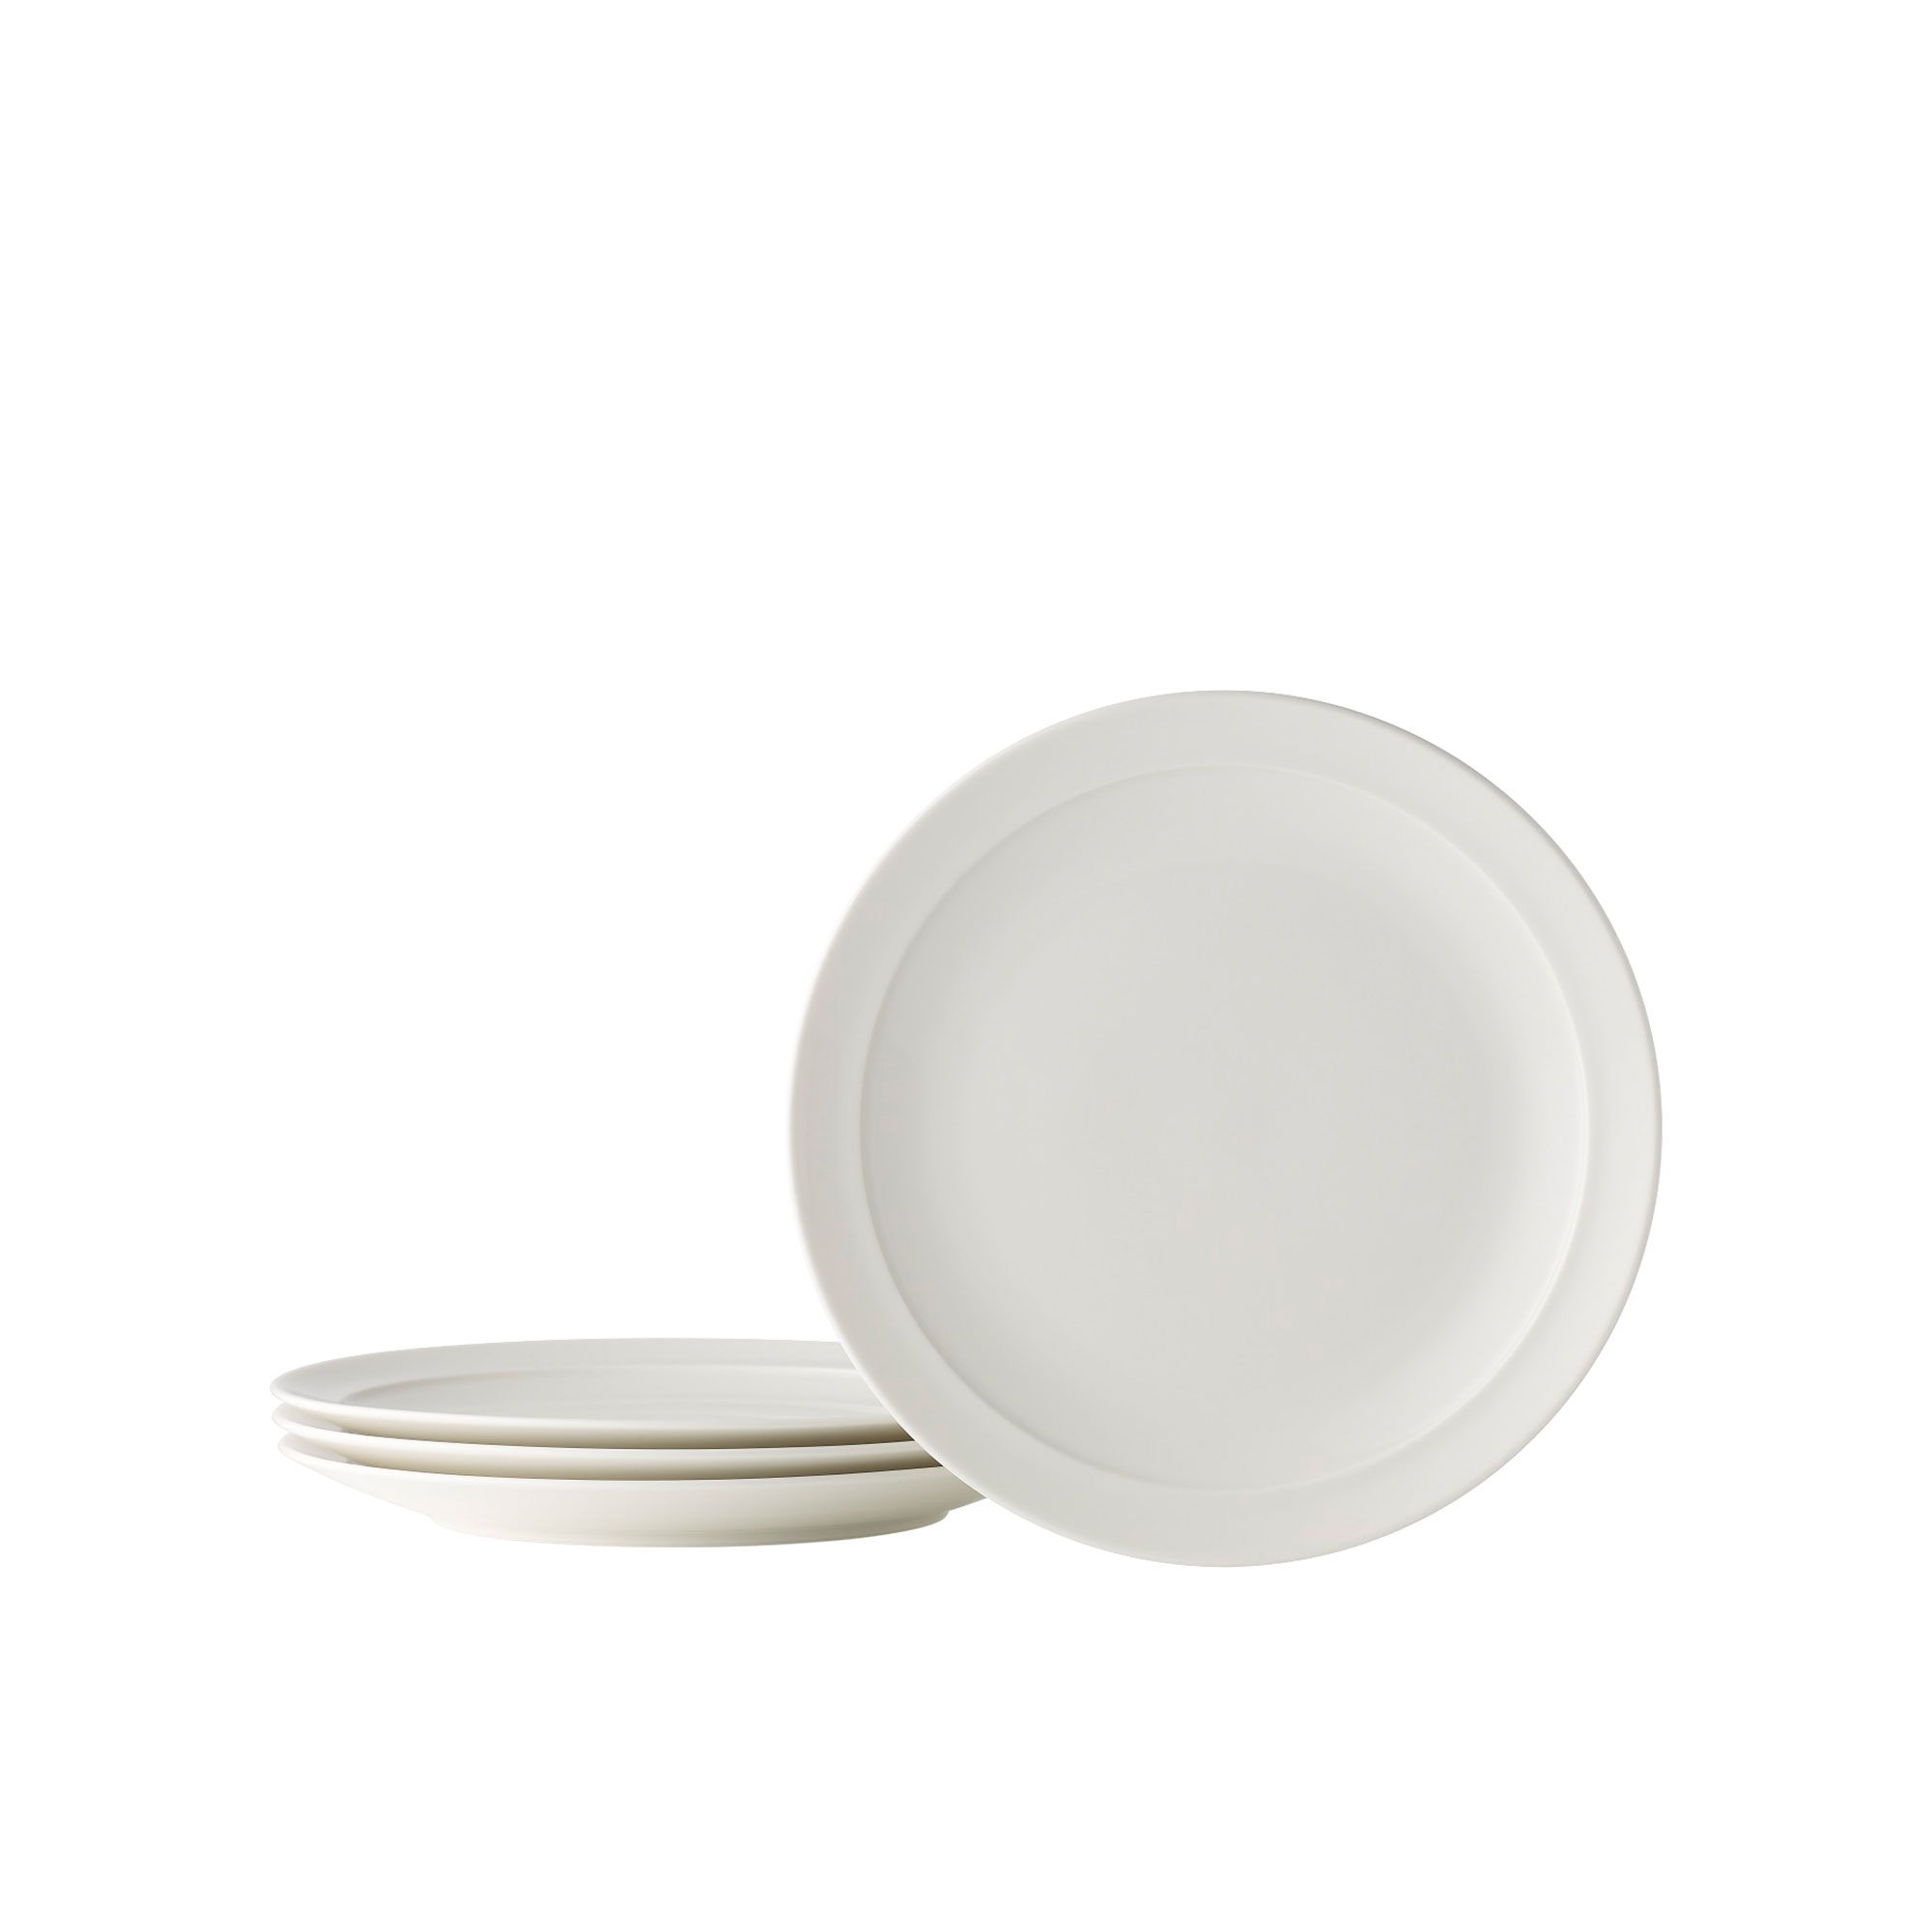 Noritake Everyday by Adam Liaw Side Plate 21cm Set of 4 White Image 1